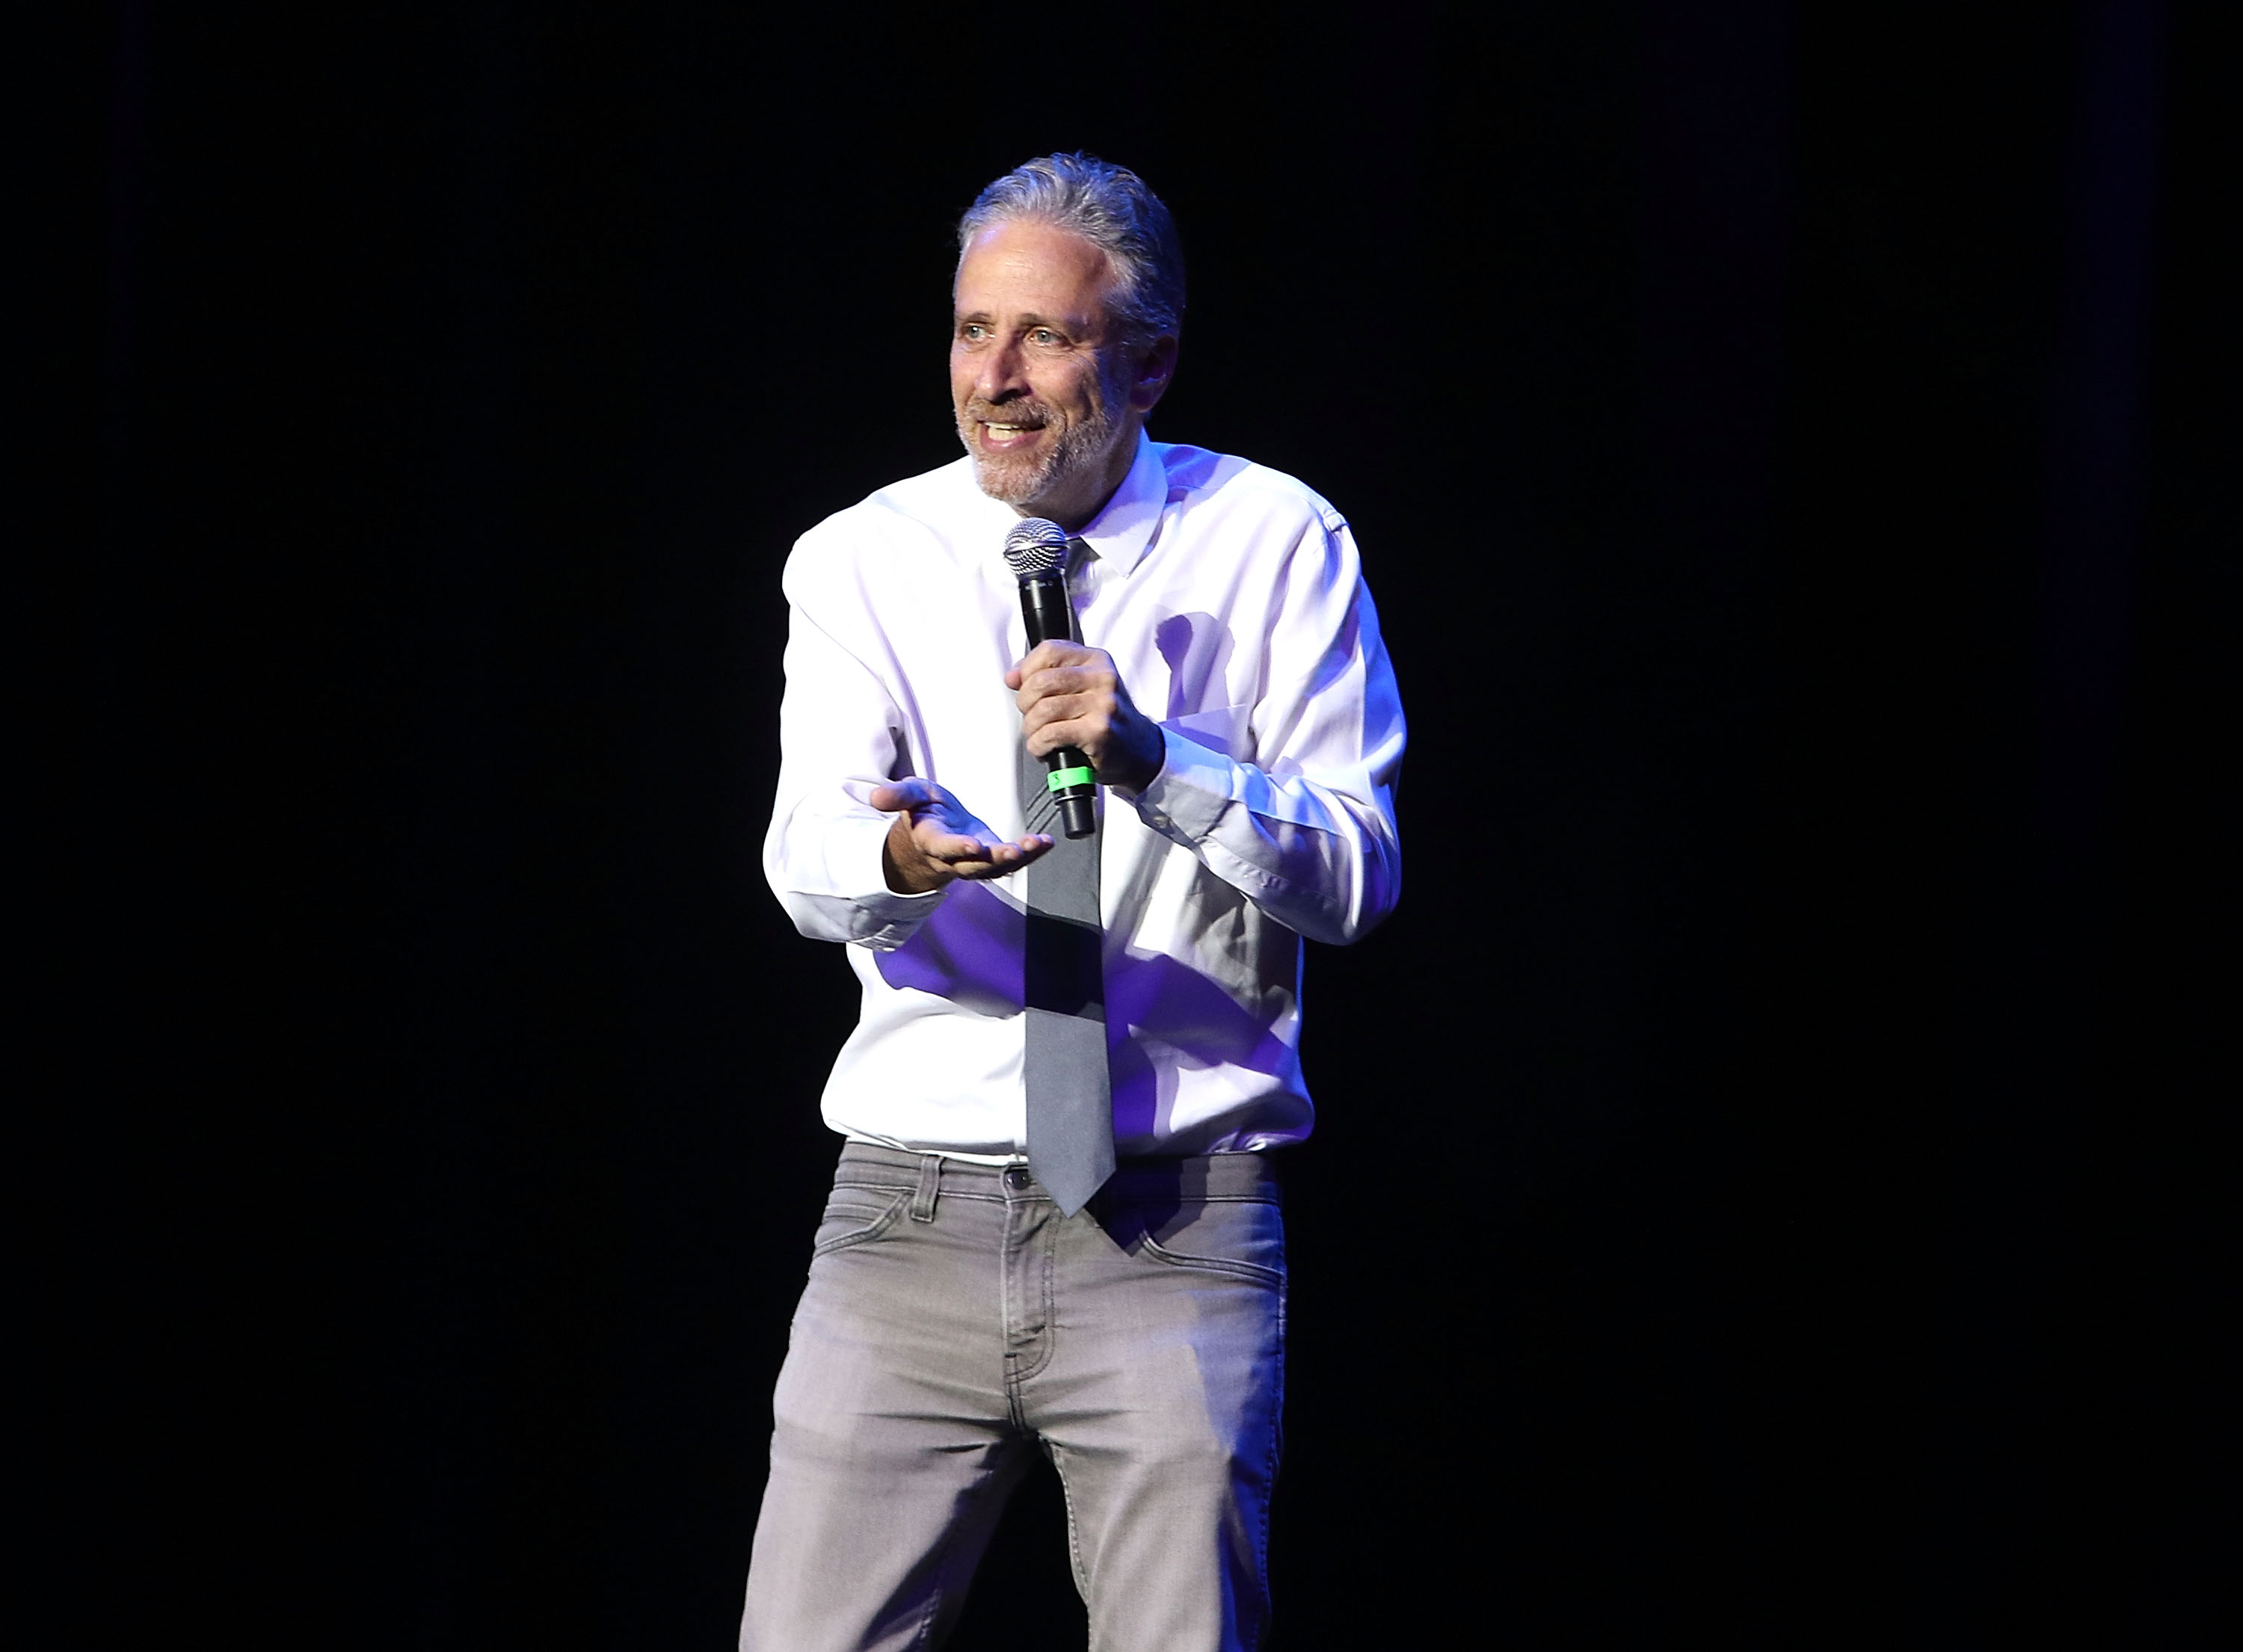 Jon Stewart attends 10th Annual Stand Up For Heroes - Show at The Theater at Madison Square Garden on Nov. 1, 2016 in New York City. (Laura Cavanaugh—FilmMagic)